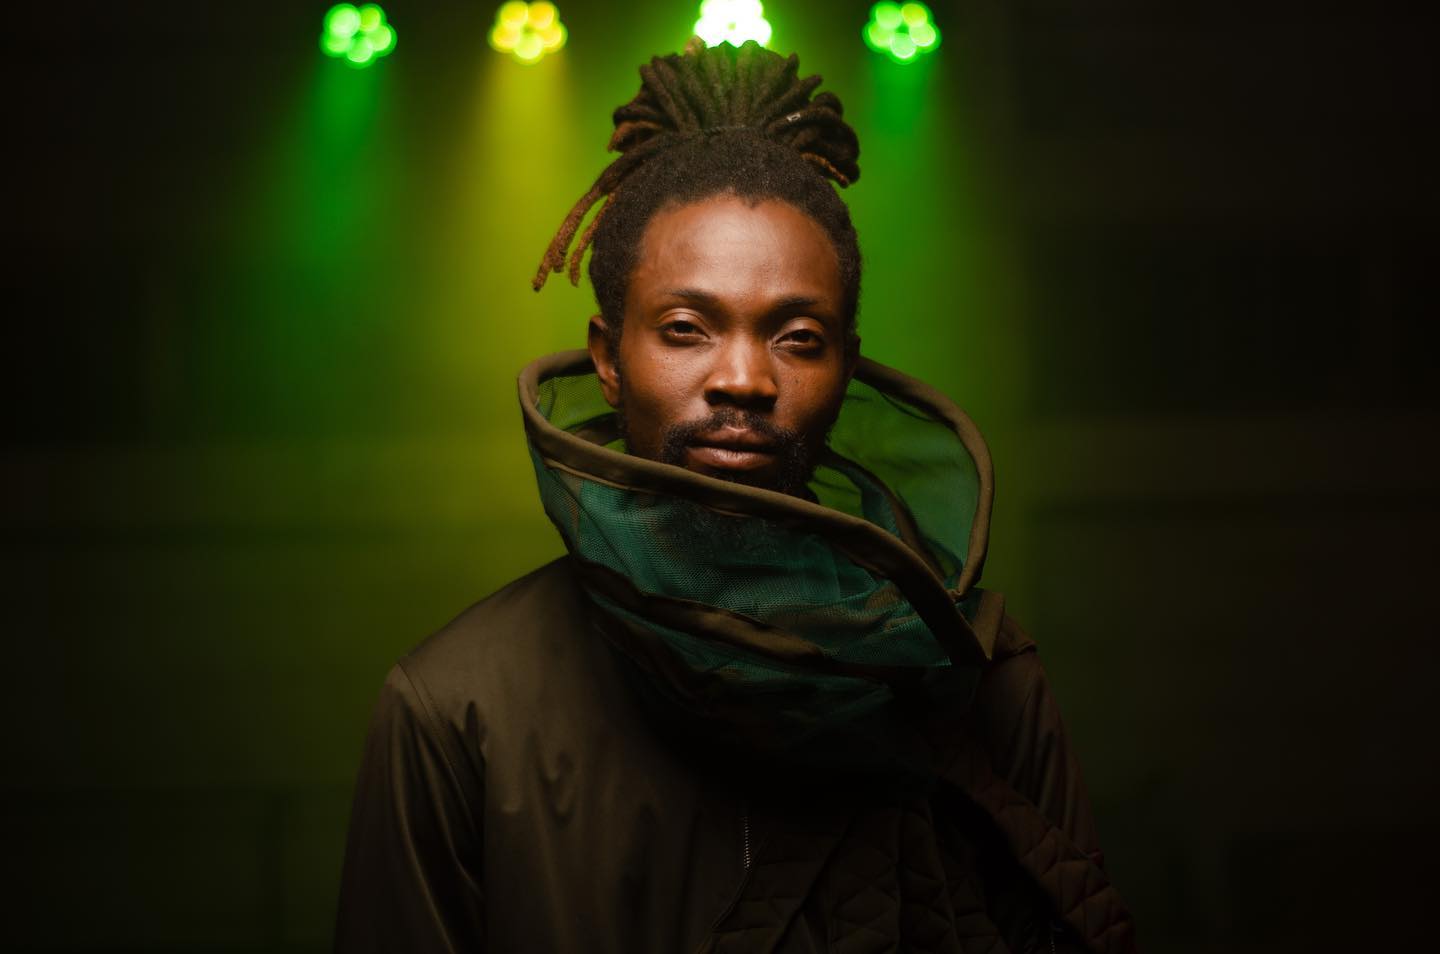 “I just say what is in my heart I Don't Write Songs” - Jay Rox